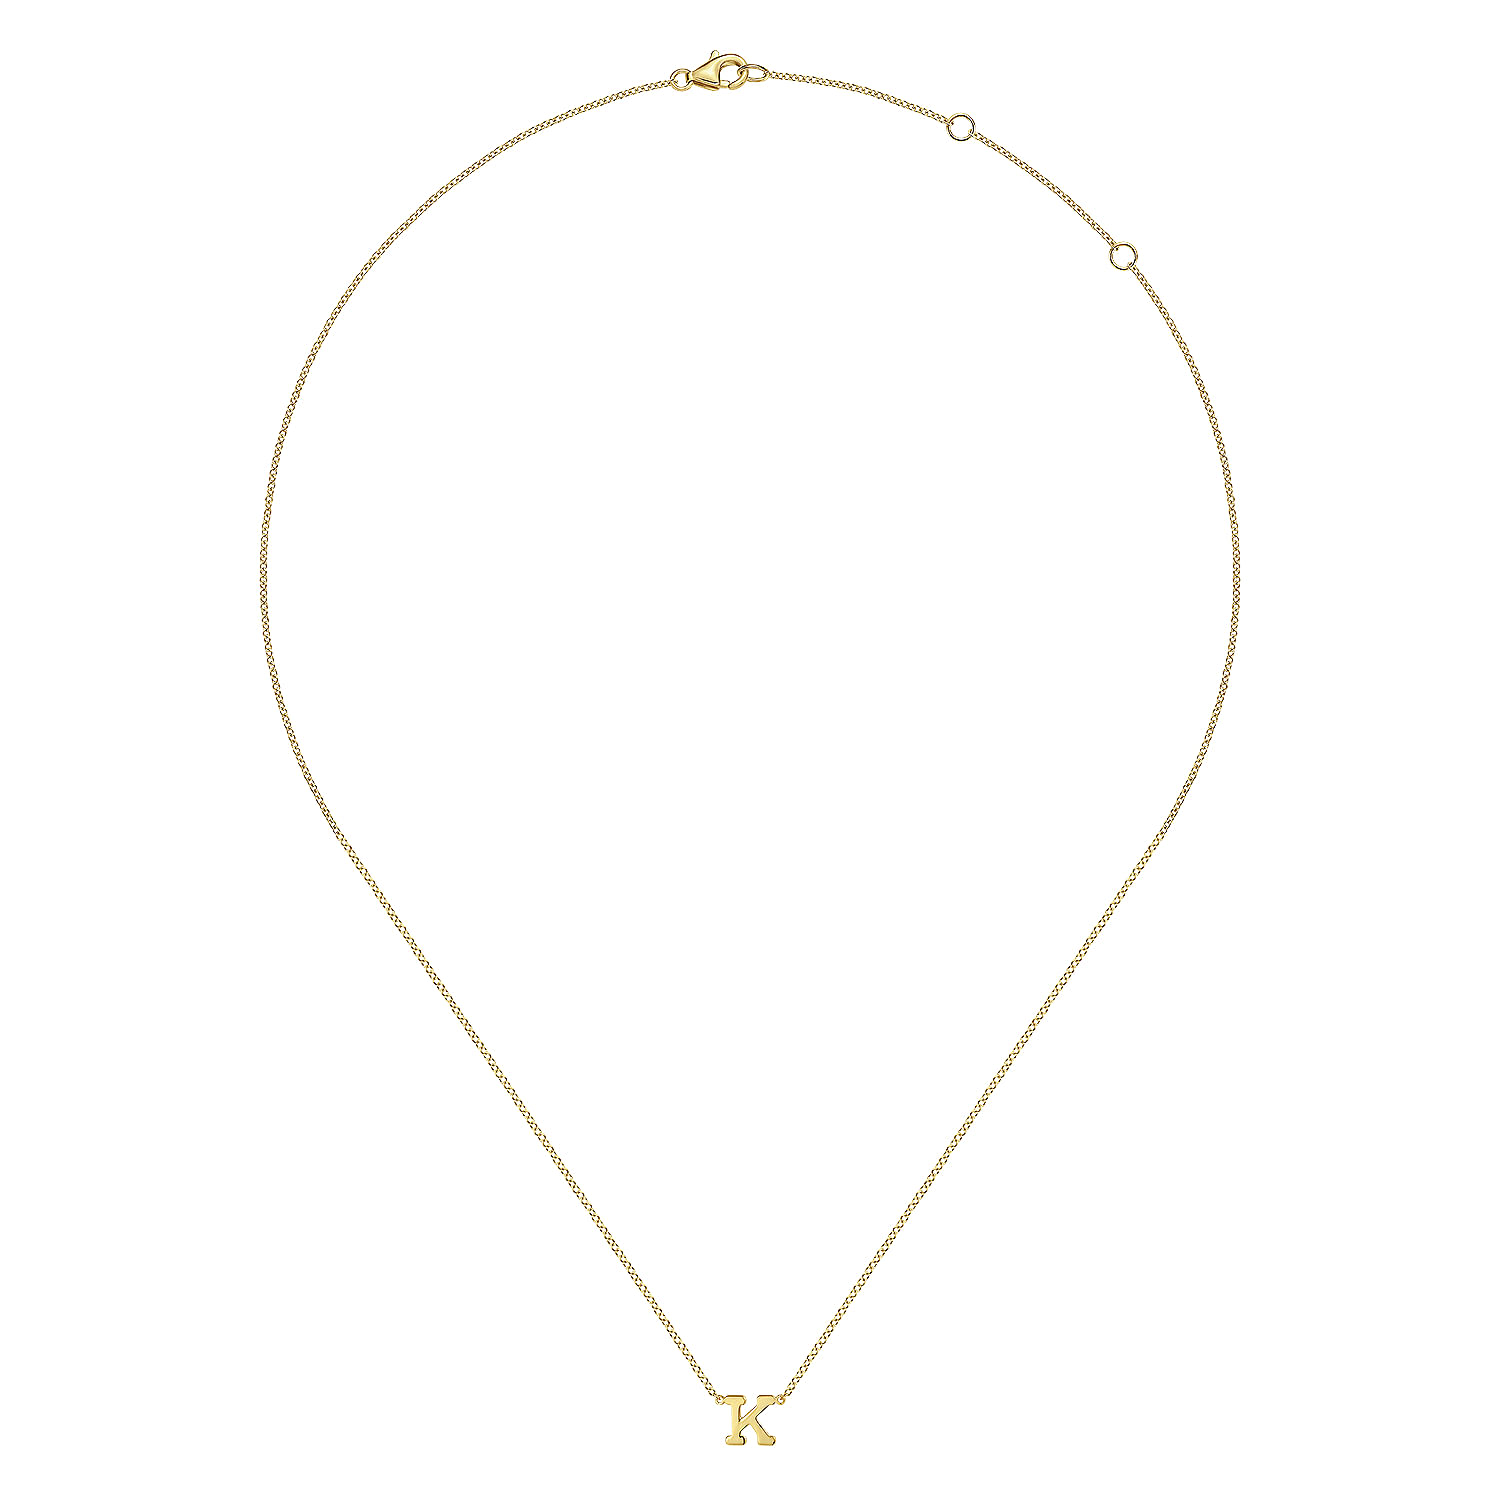 14K Yellow Gold K Initial Necklace